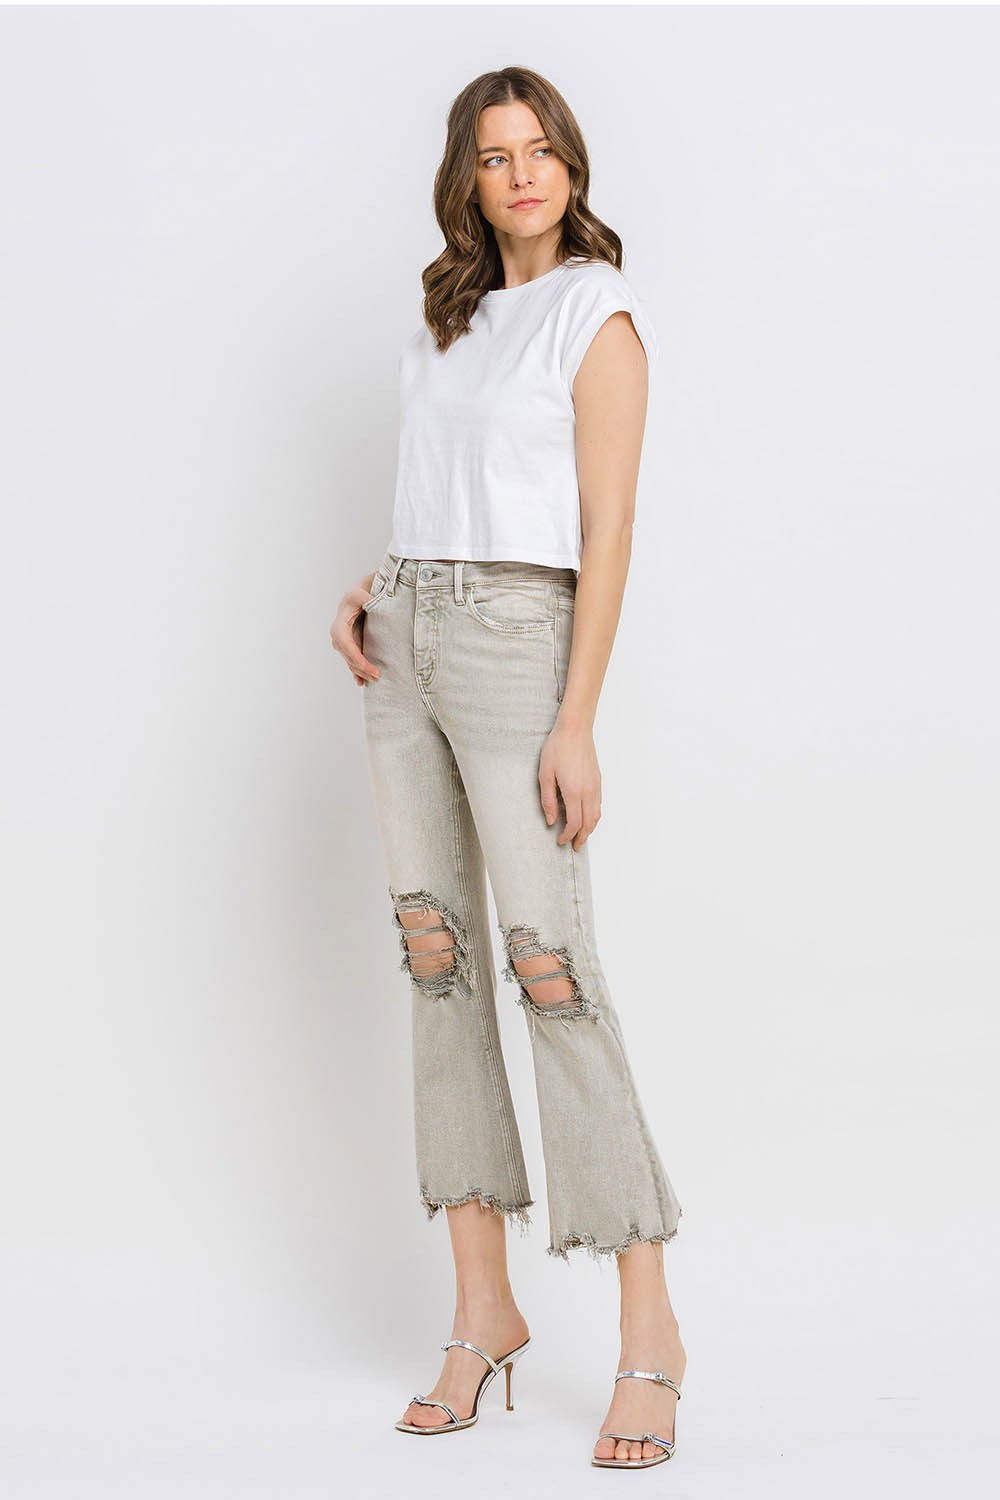 These distressed raw hem cropped flare jeans offer a perfect blend of edgy and retro style. The distressed detailing adds a touch of urban flair to the flared silhouette. The raw hem finishes off the look with a trendy, unfinished edge. Pair these jeans with a tucked-in graphic tee and platform sandals for a vintage-inspired outfit.  24-32